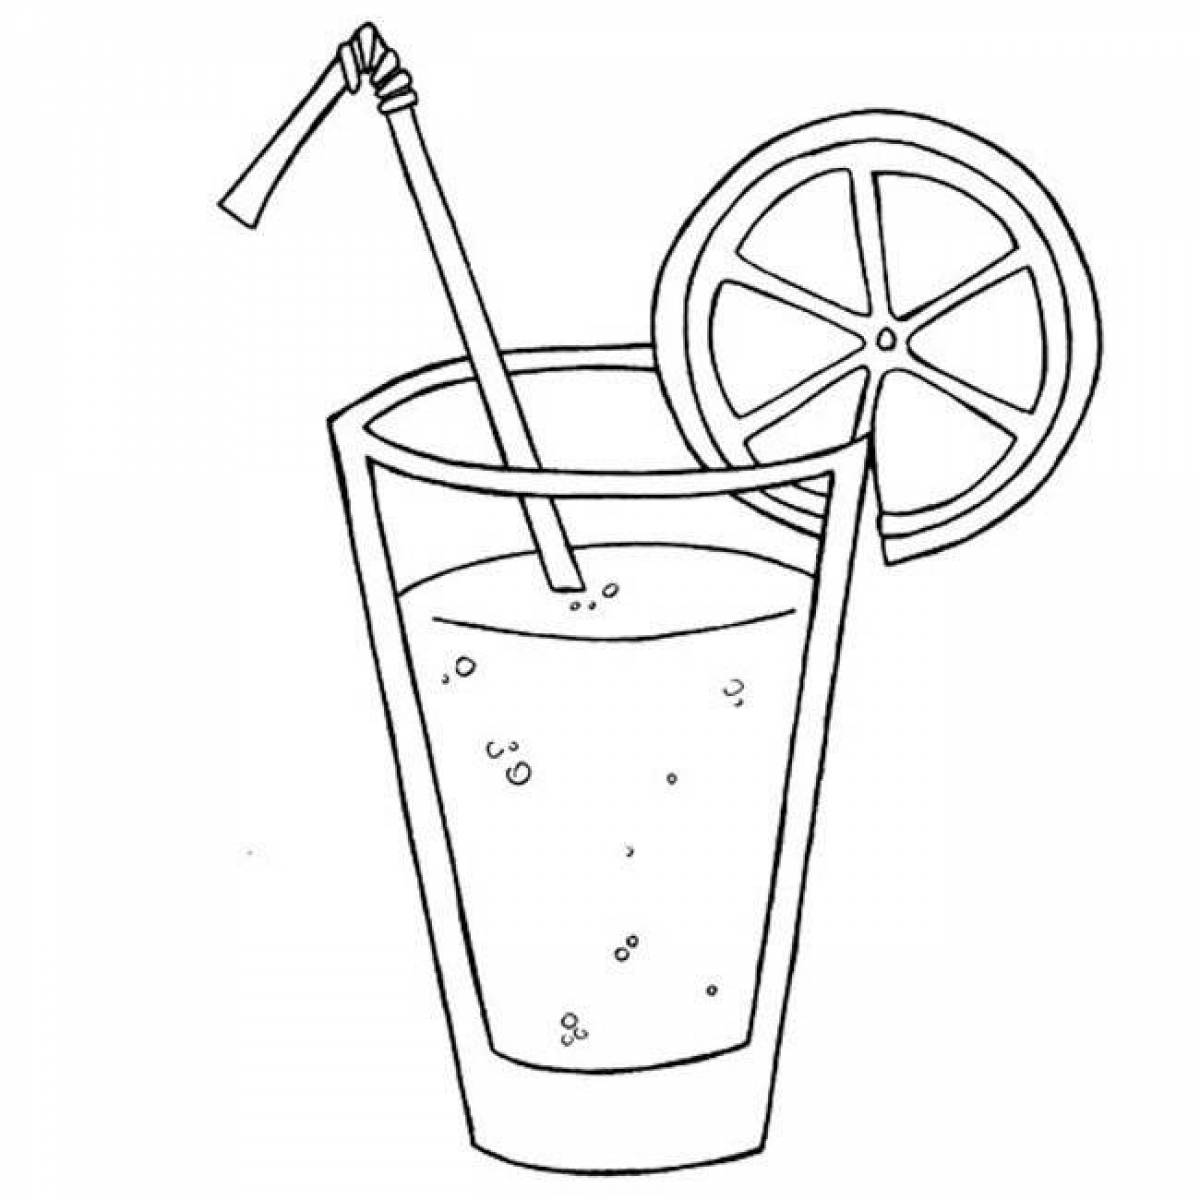 Coloring page charming cocktail